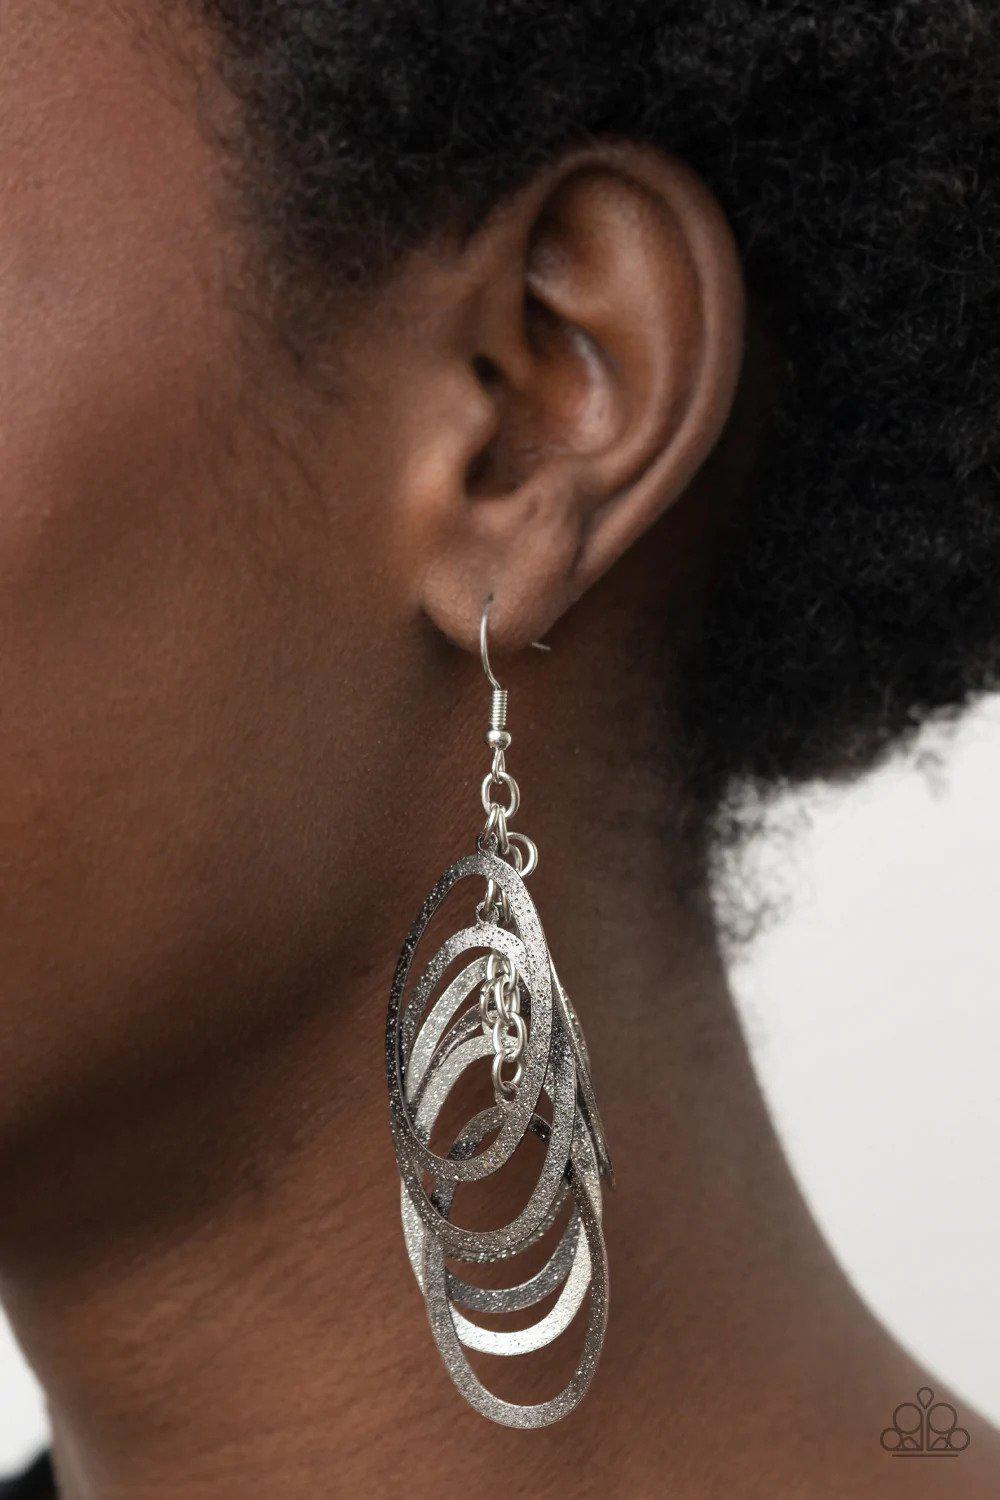 Mind OVAL Matter Multi Earrings - Paparazzi Accessories- on model - CarasShop.com - $5 Jewelry by Cara Jewels